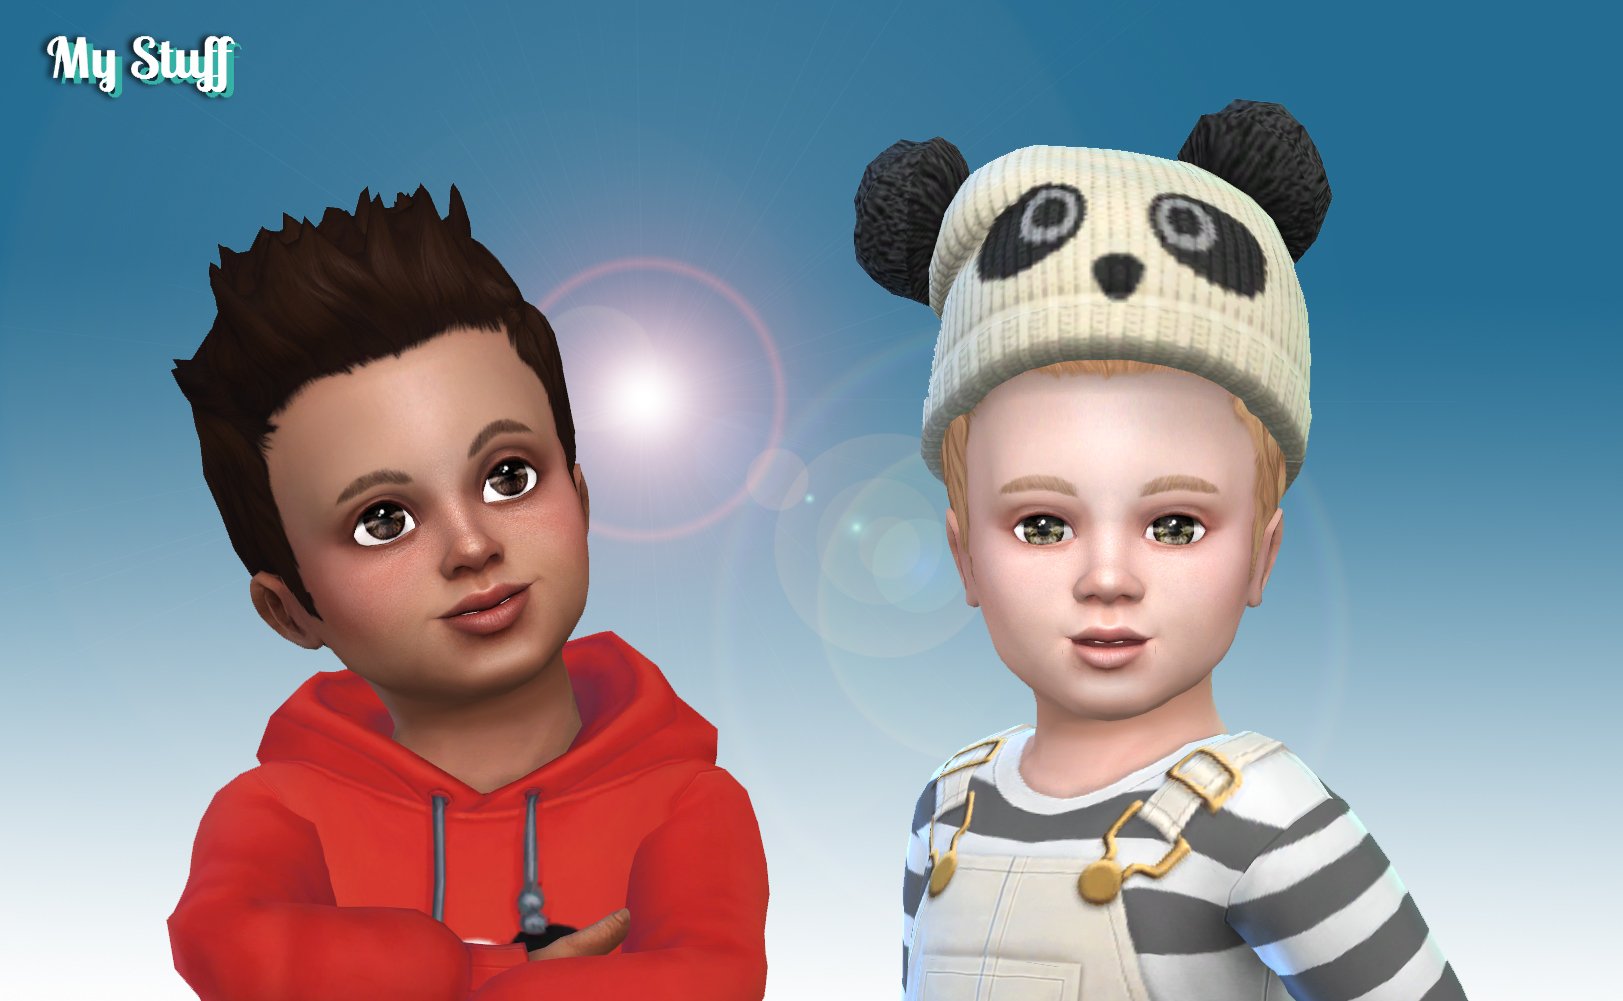 Robert Hairstyle for Toddlers